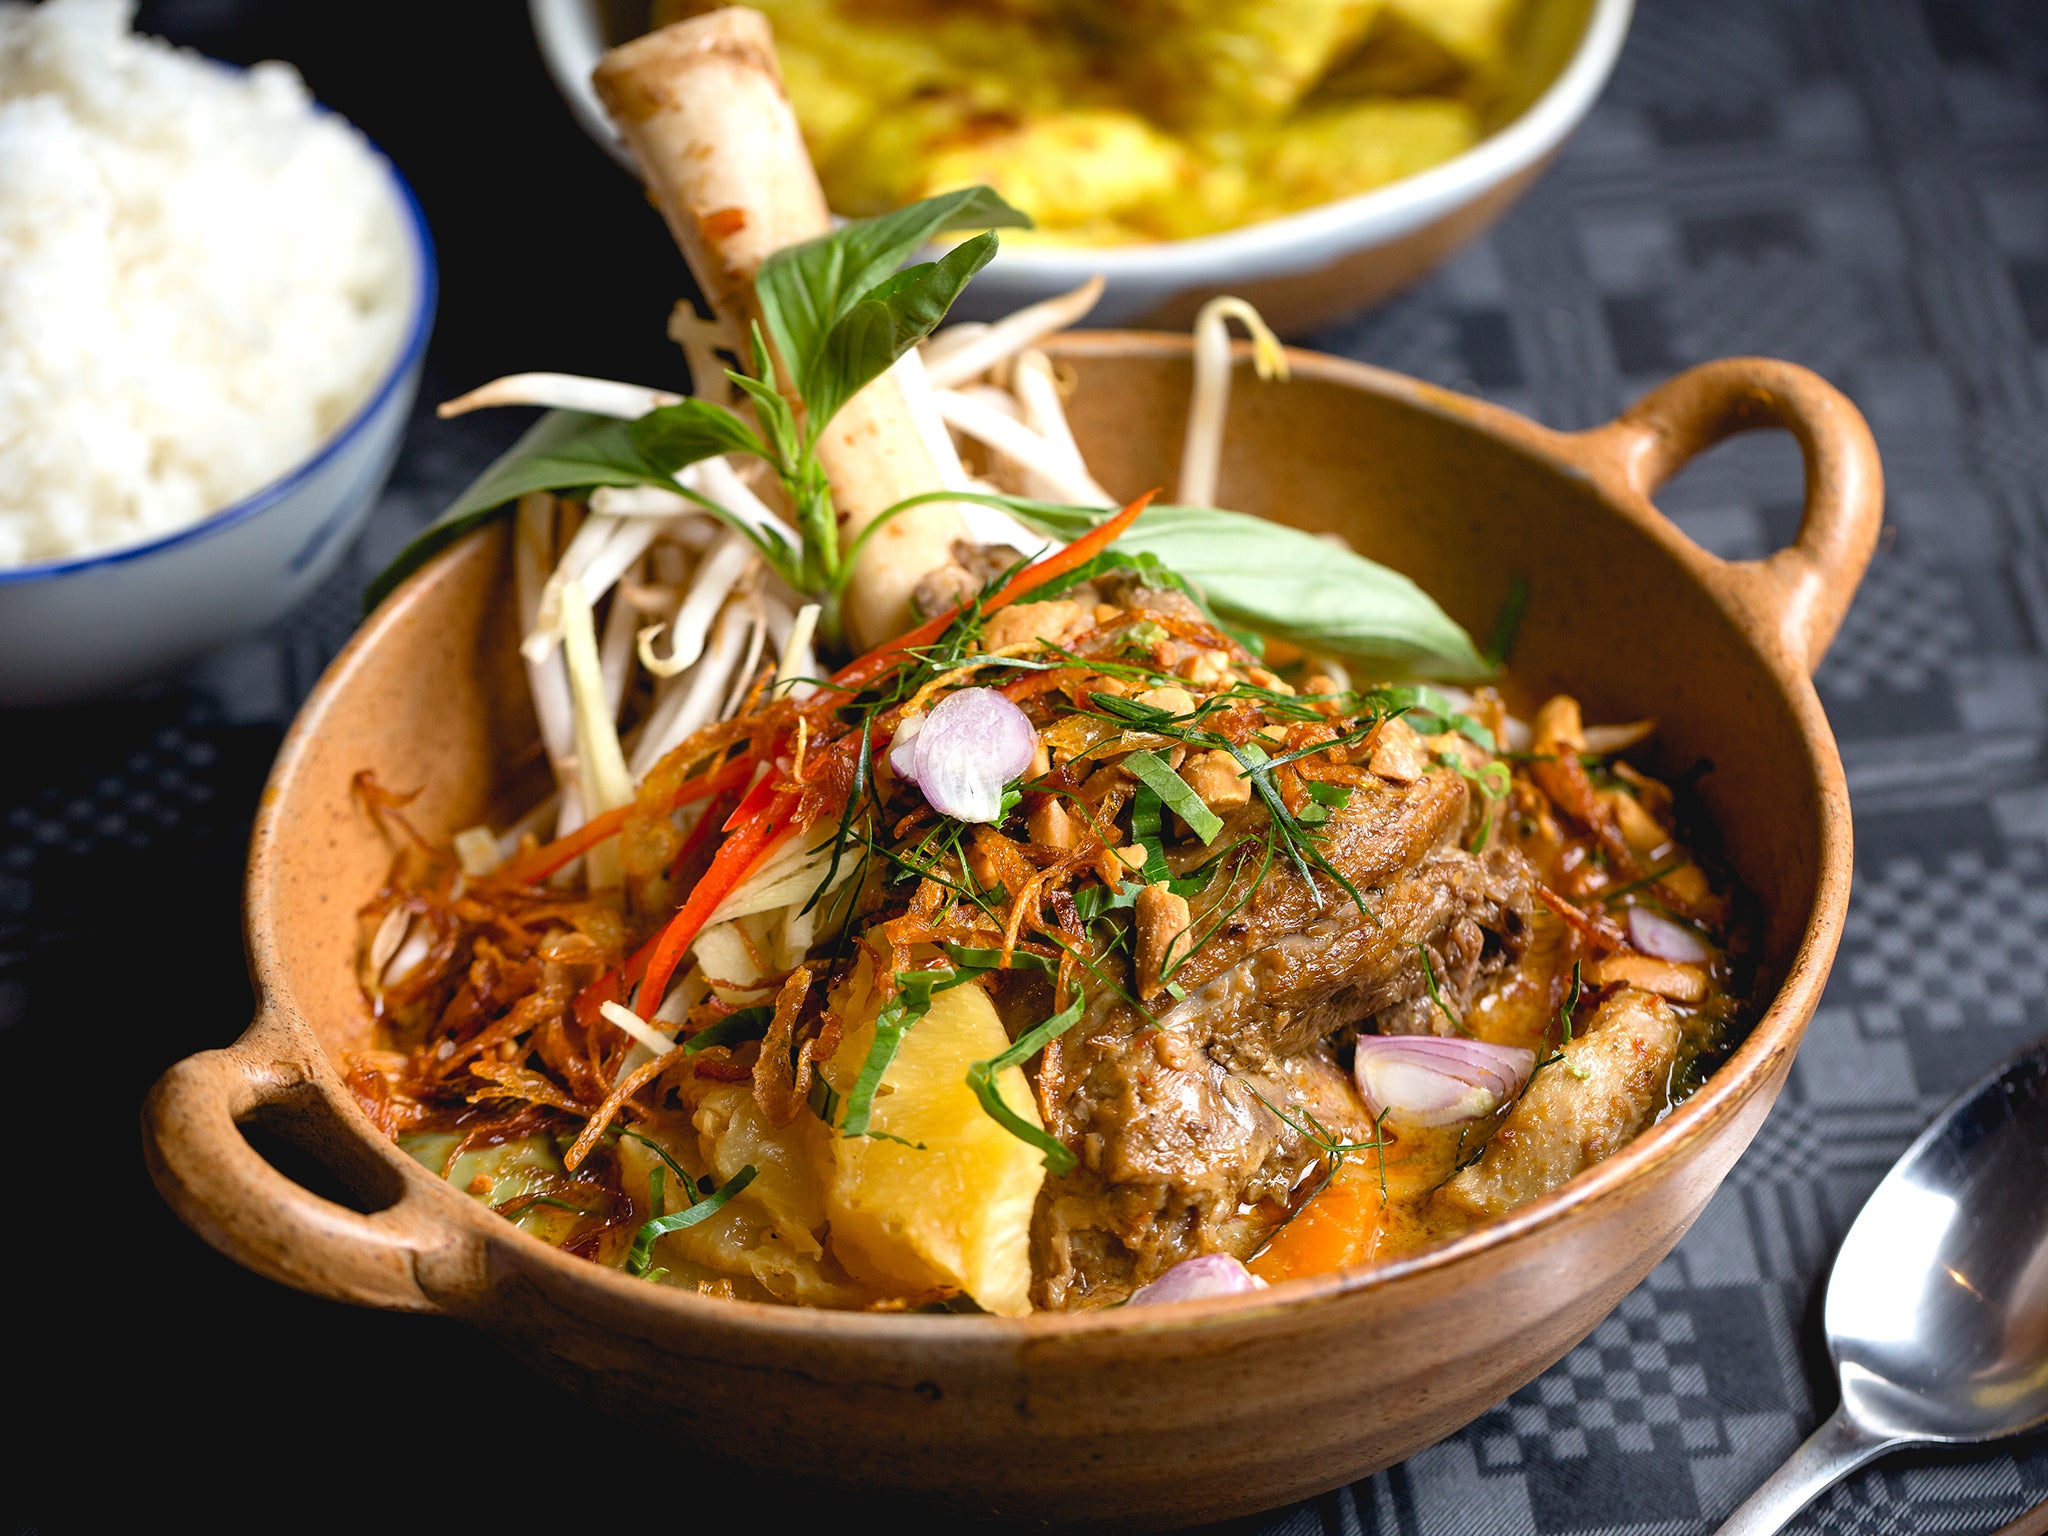 Put leftover lamb and vegetables to good use in this massaman curry